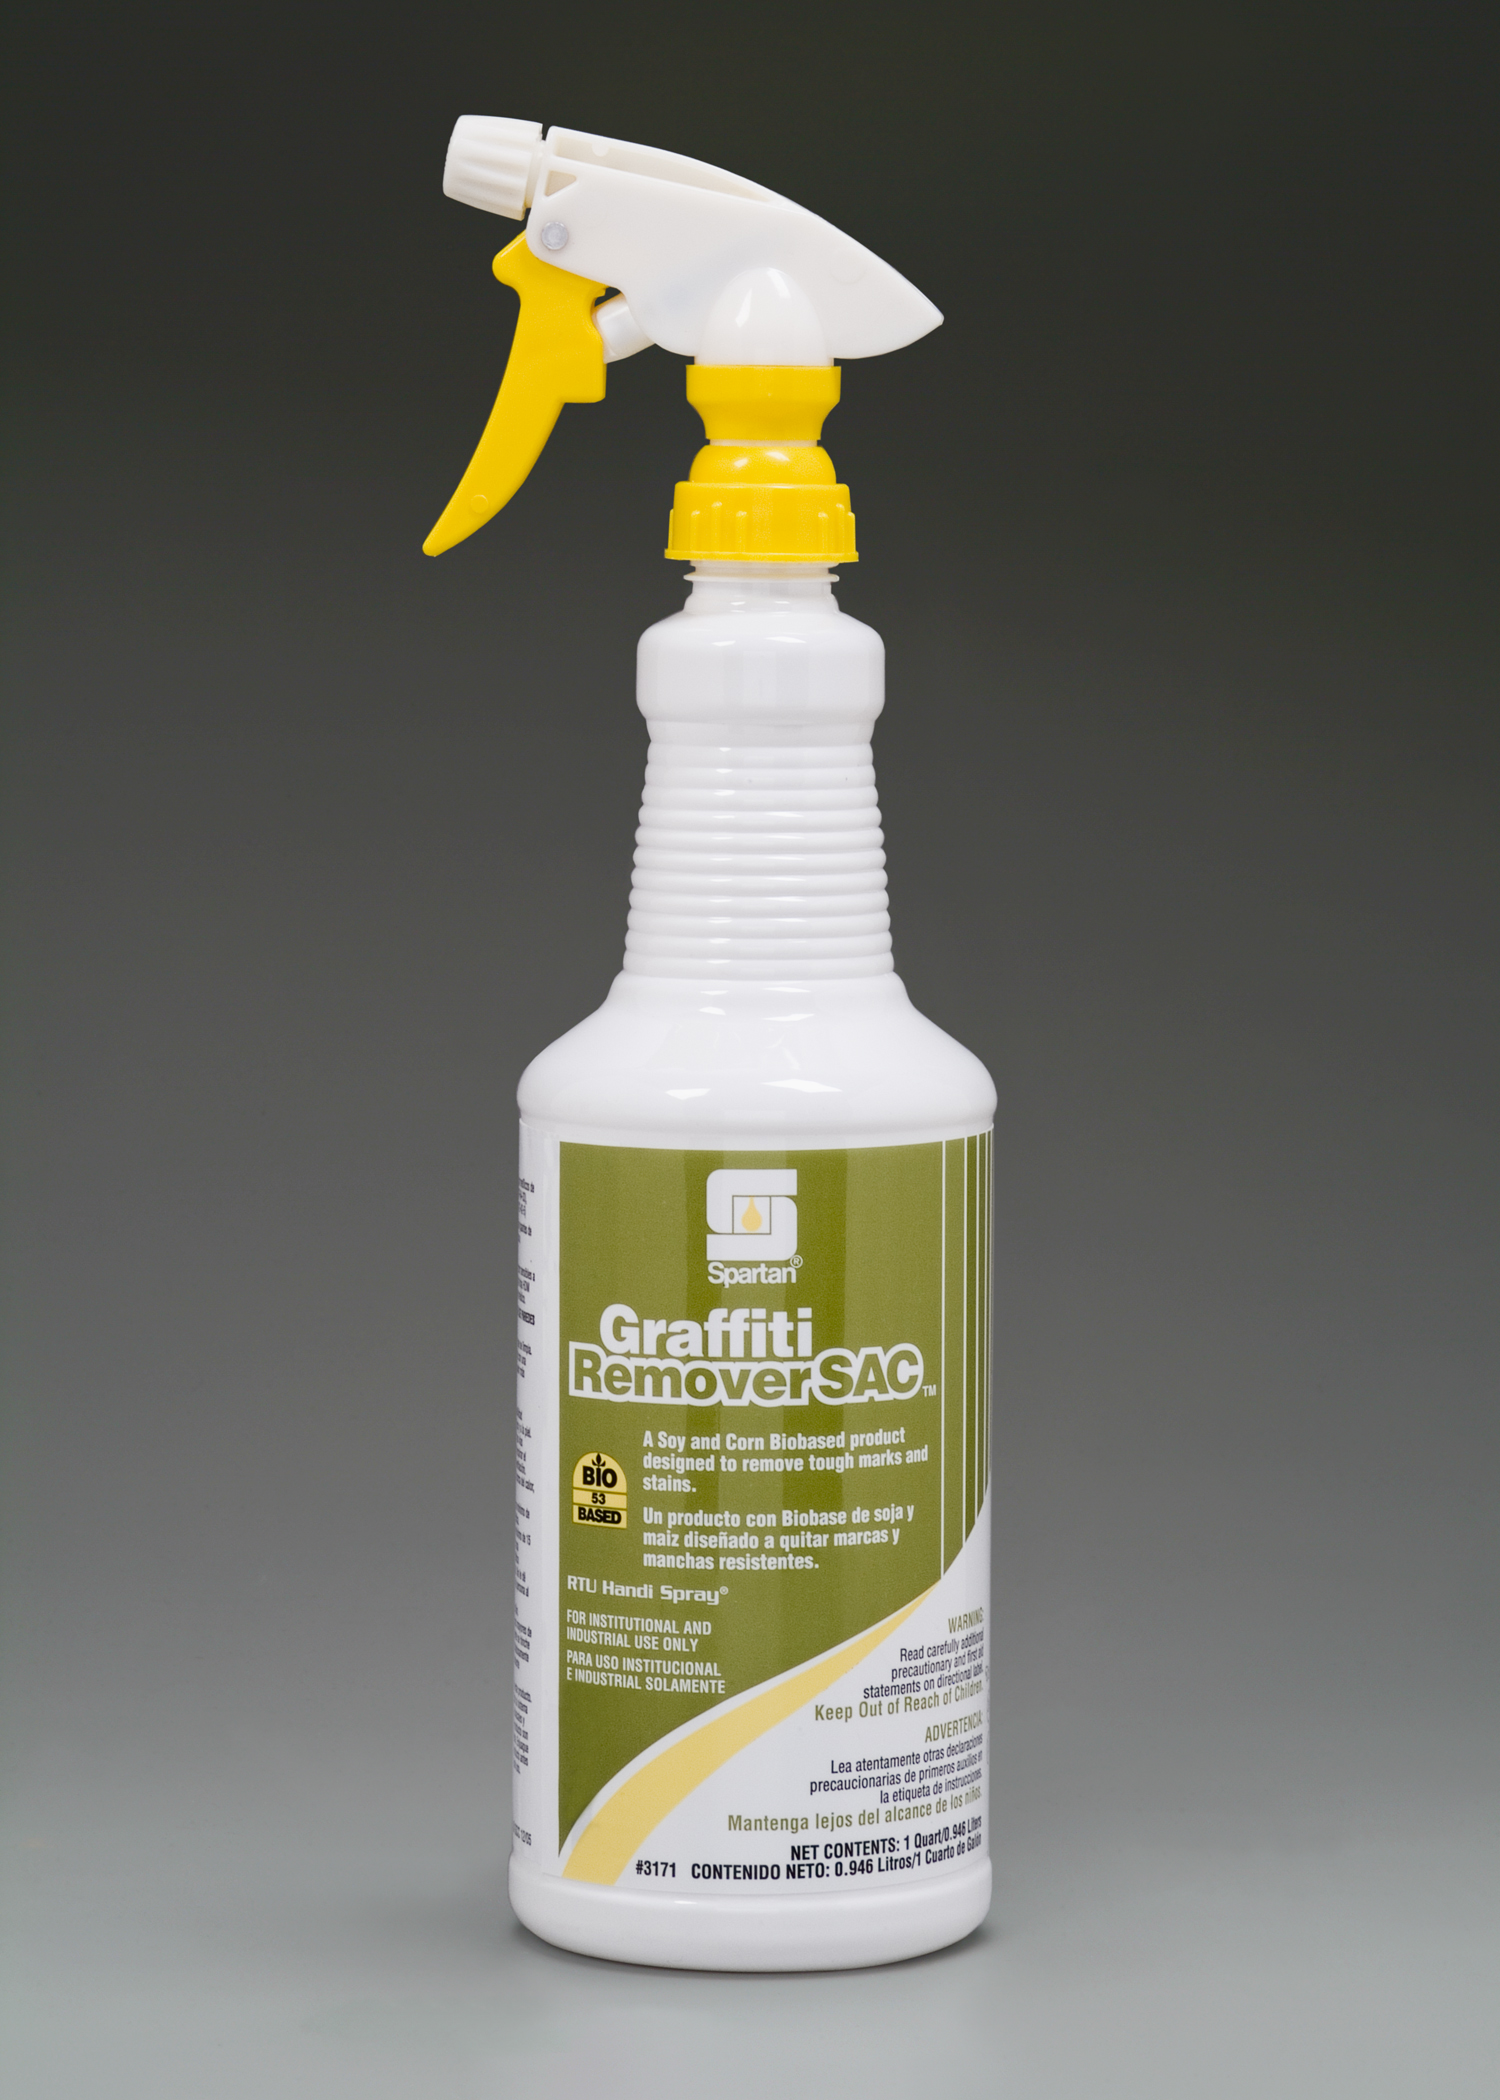 Graffiti remover made with soybean and corn biobased green cleaning products